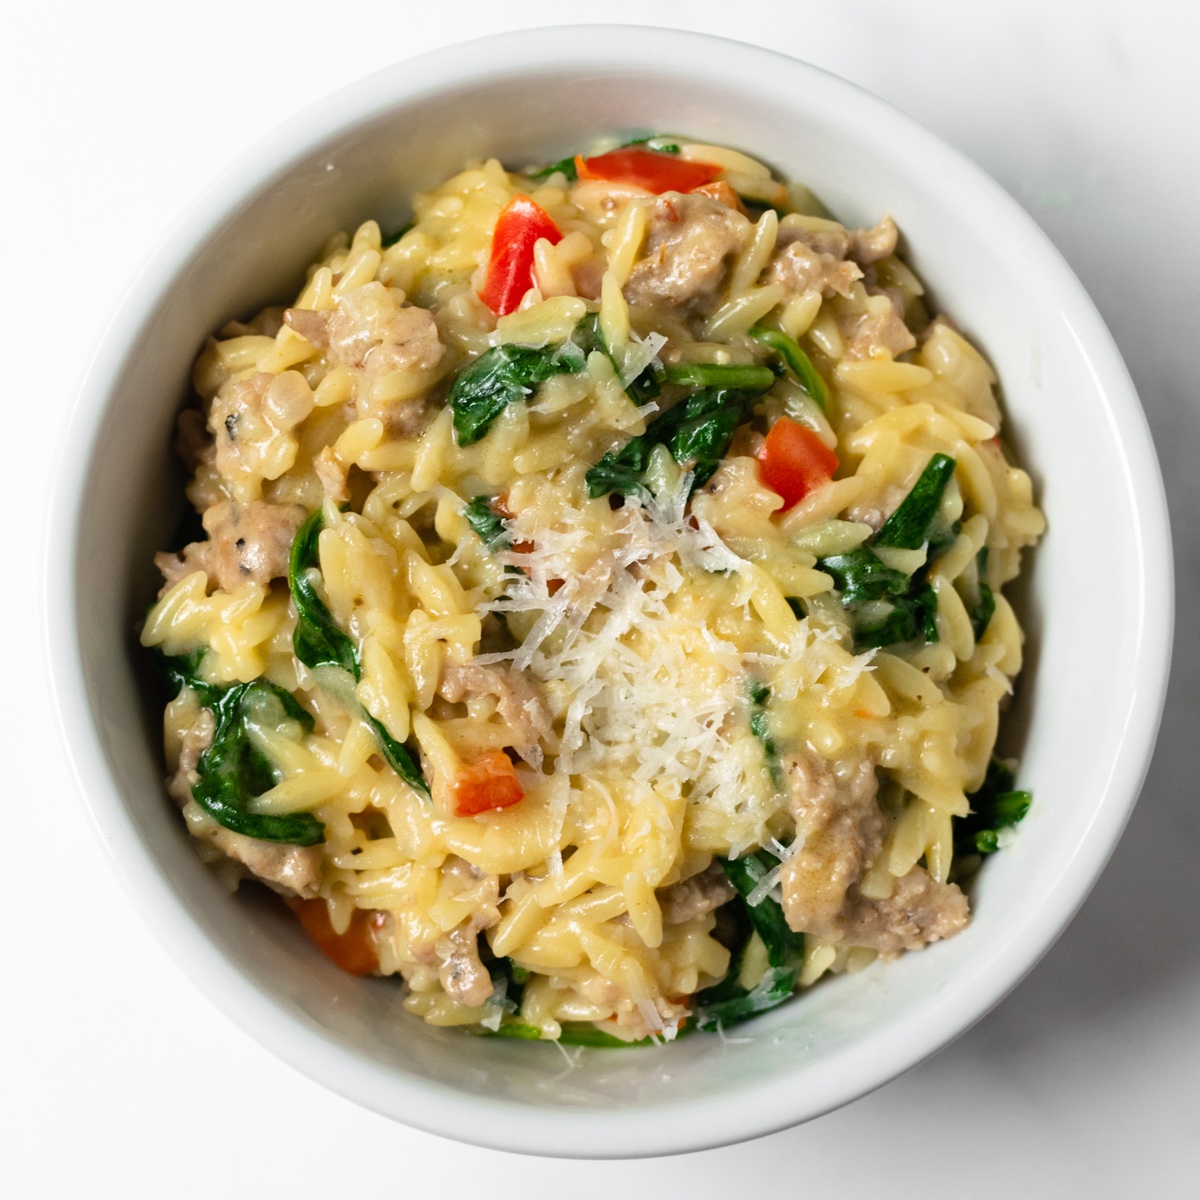 A quick and easy dinner recipe that delivers! This one pan Italian sausage orzo is made with with red bell peppers, onions, garlic, orzo, chicken broth, cream, parmesan, and spinach. It's perfect for busy weeknights— minimal effort and minimal clean up!